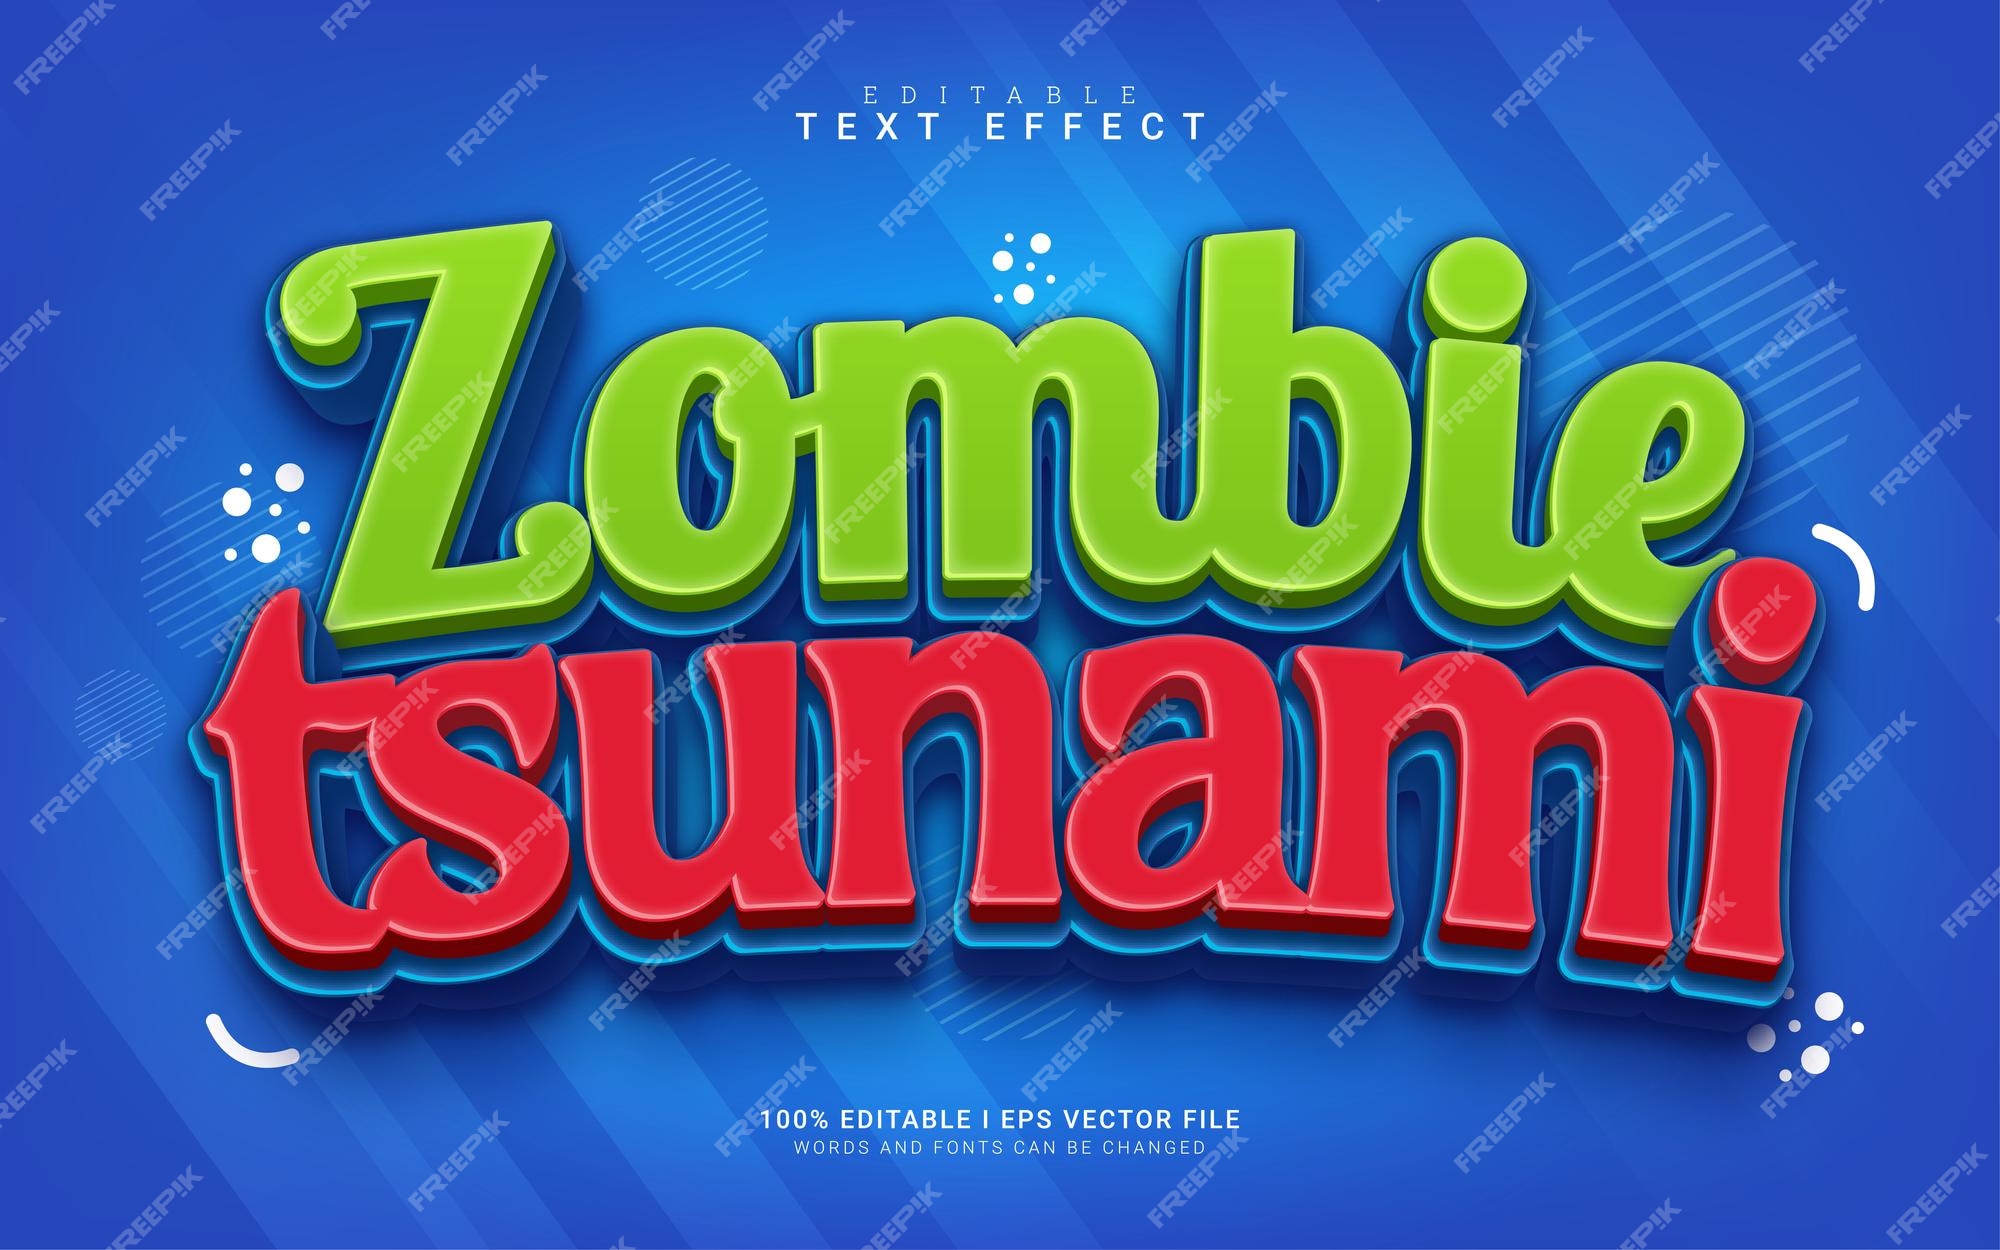 Premium Vector  Zombie tsunami cartoon 3d style text effect for game